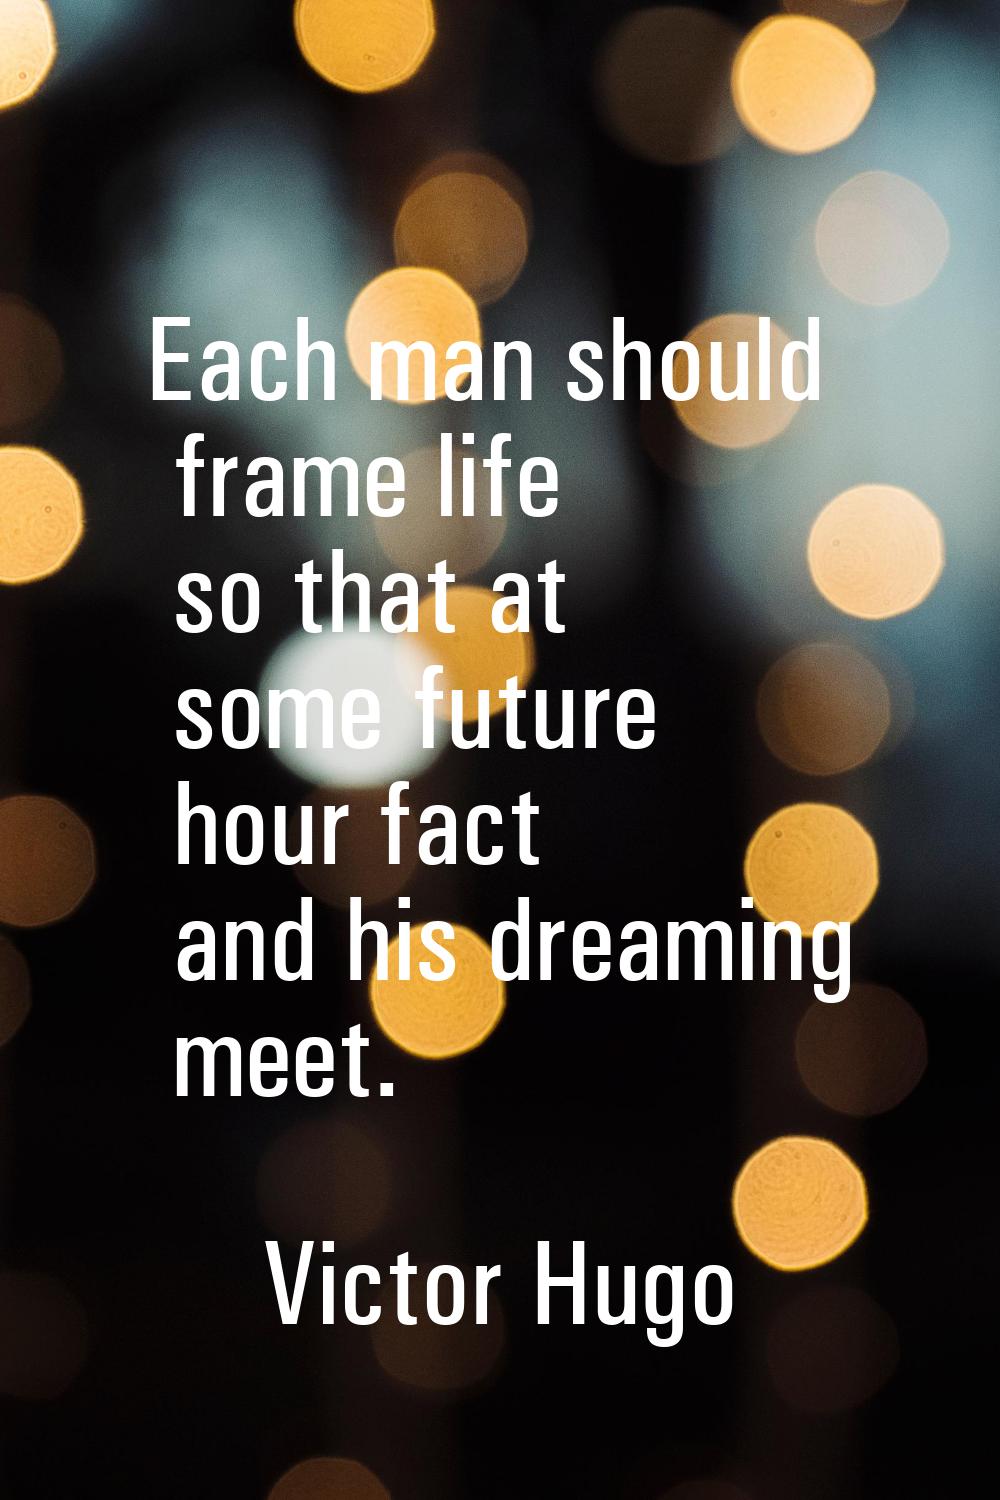 Each man should frame life so that at some future hour fact and his dreaming meet.